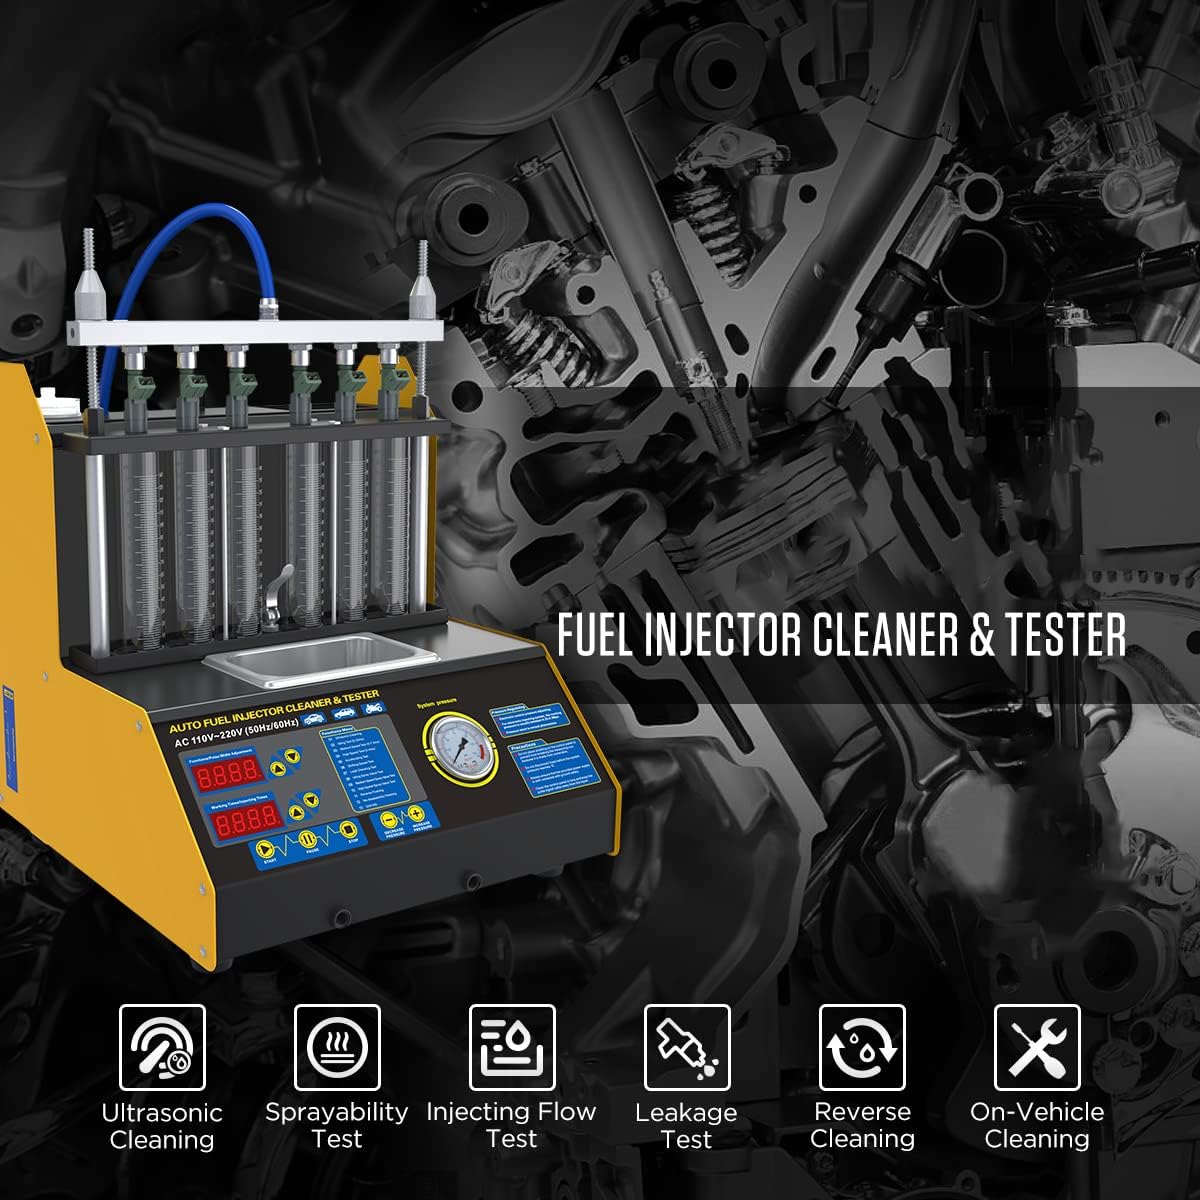 Fuel Injector Cleaner Tester Tools Automotive 6 Cylinder Ultrasonic Wave Fuel Injector Cleaner & Tester Machine CT-200 Car Fuel Injectors Testers 110V/220V